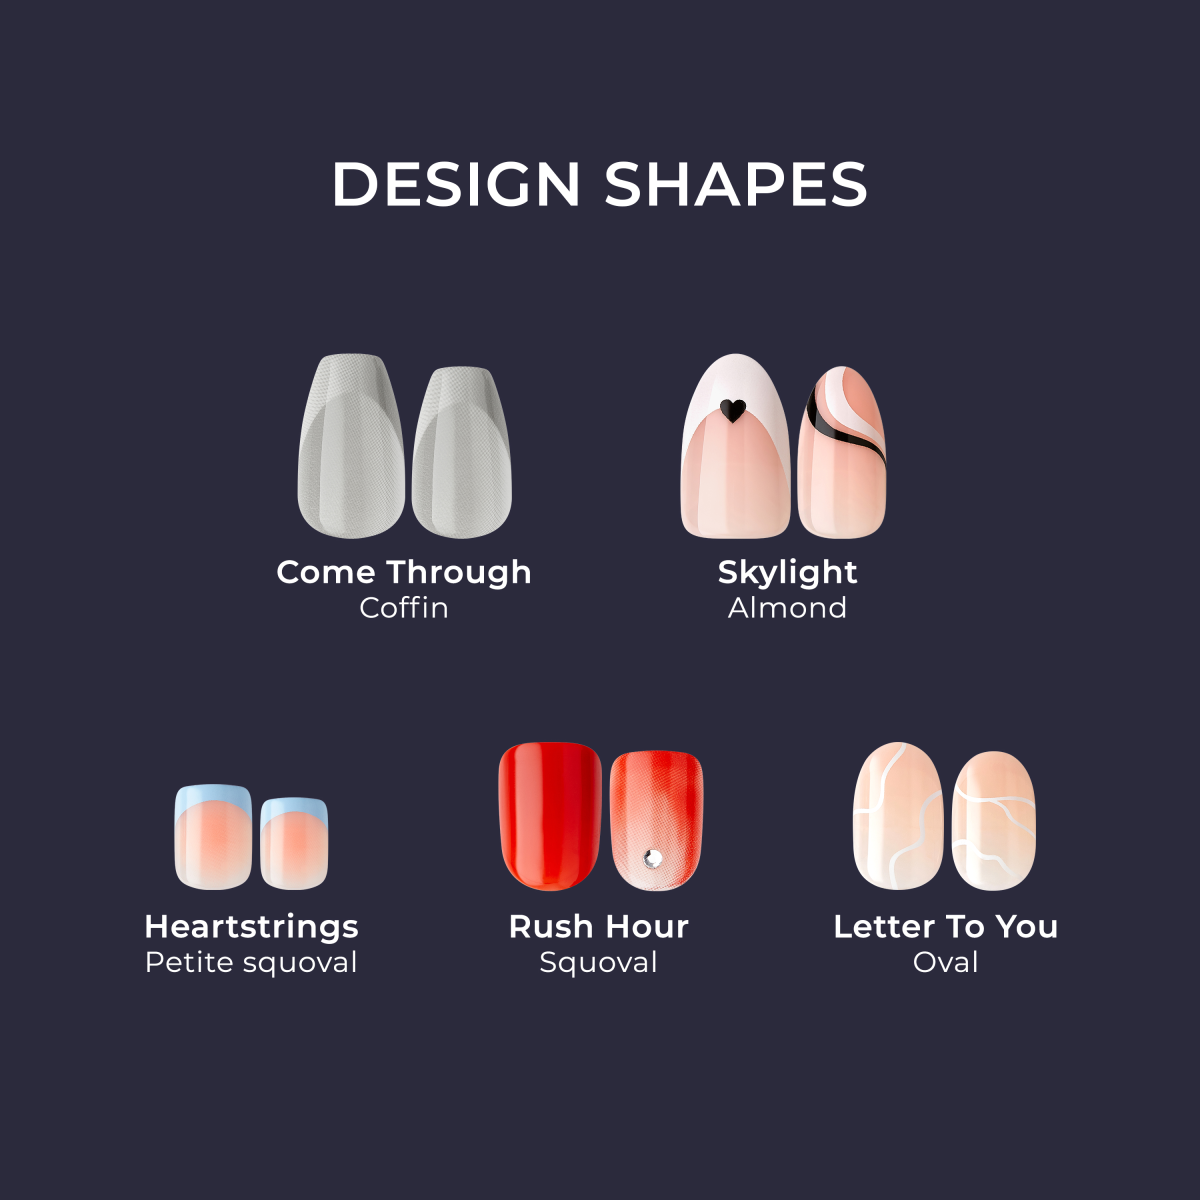 imPRESS Design Press-On Nails - For the Night